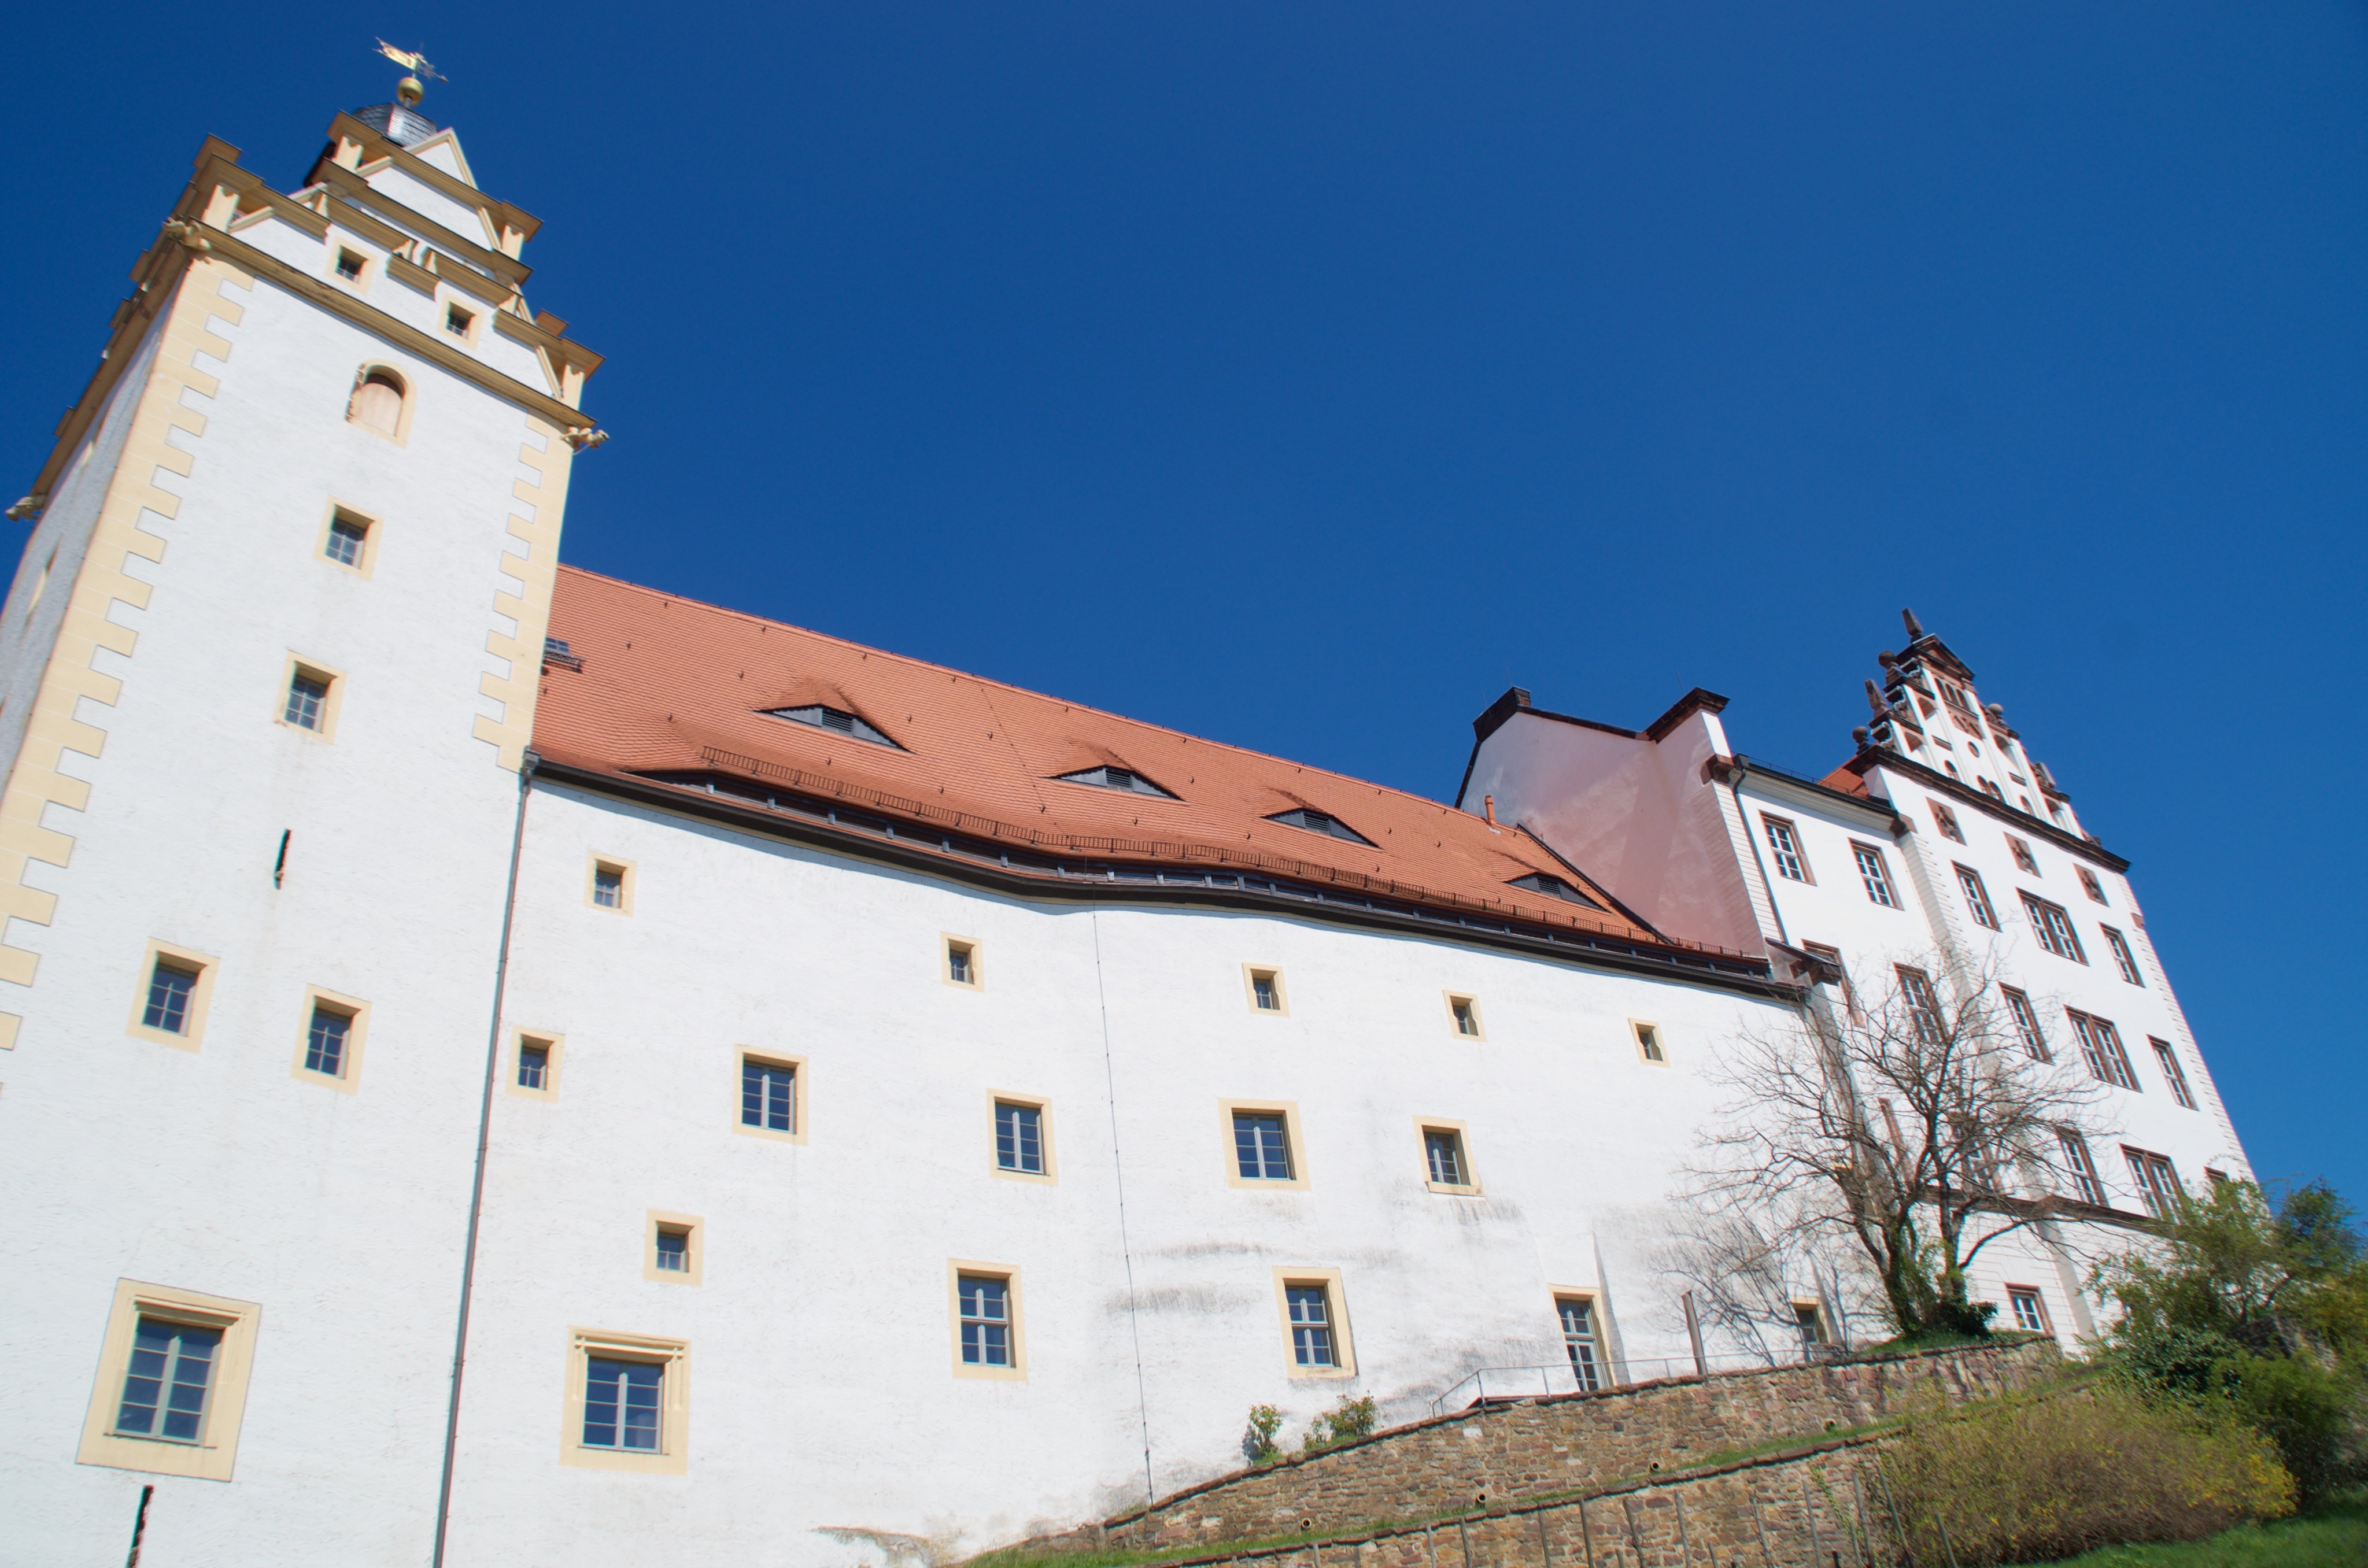 Schloss Colditz is famous as the most secure prisoner-of-war camp for Allied officers in the second world war, but its recorded history goes back to 1036. It is one of many historic castles in Saxony, eastern Germany. Photo: Peter Neville-Hadley